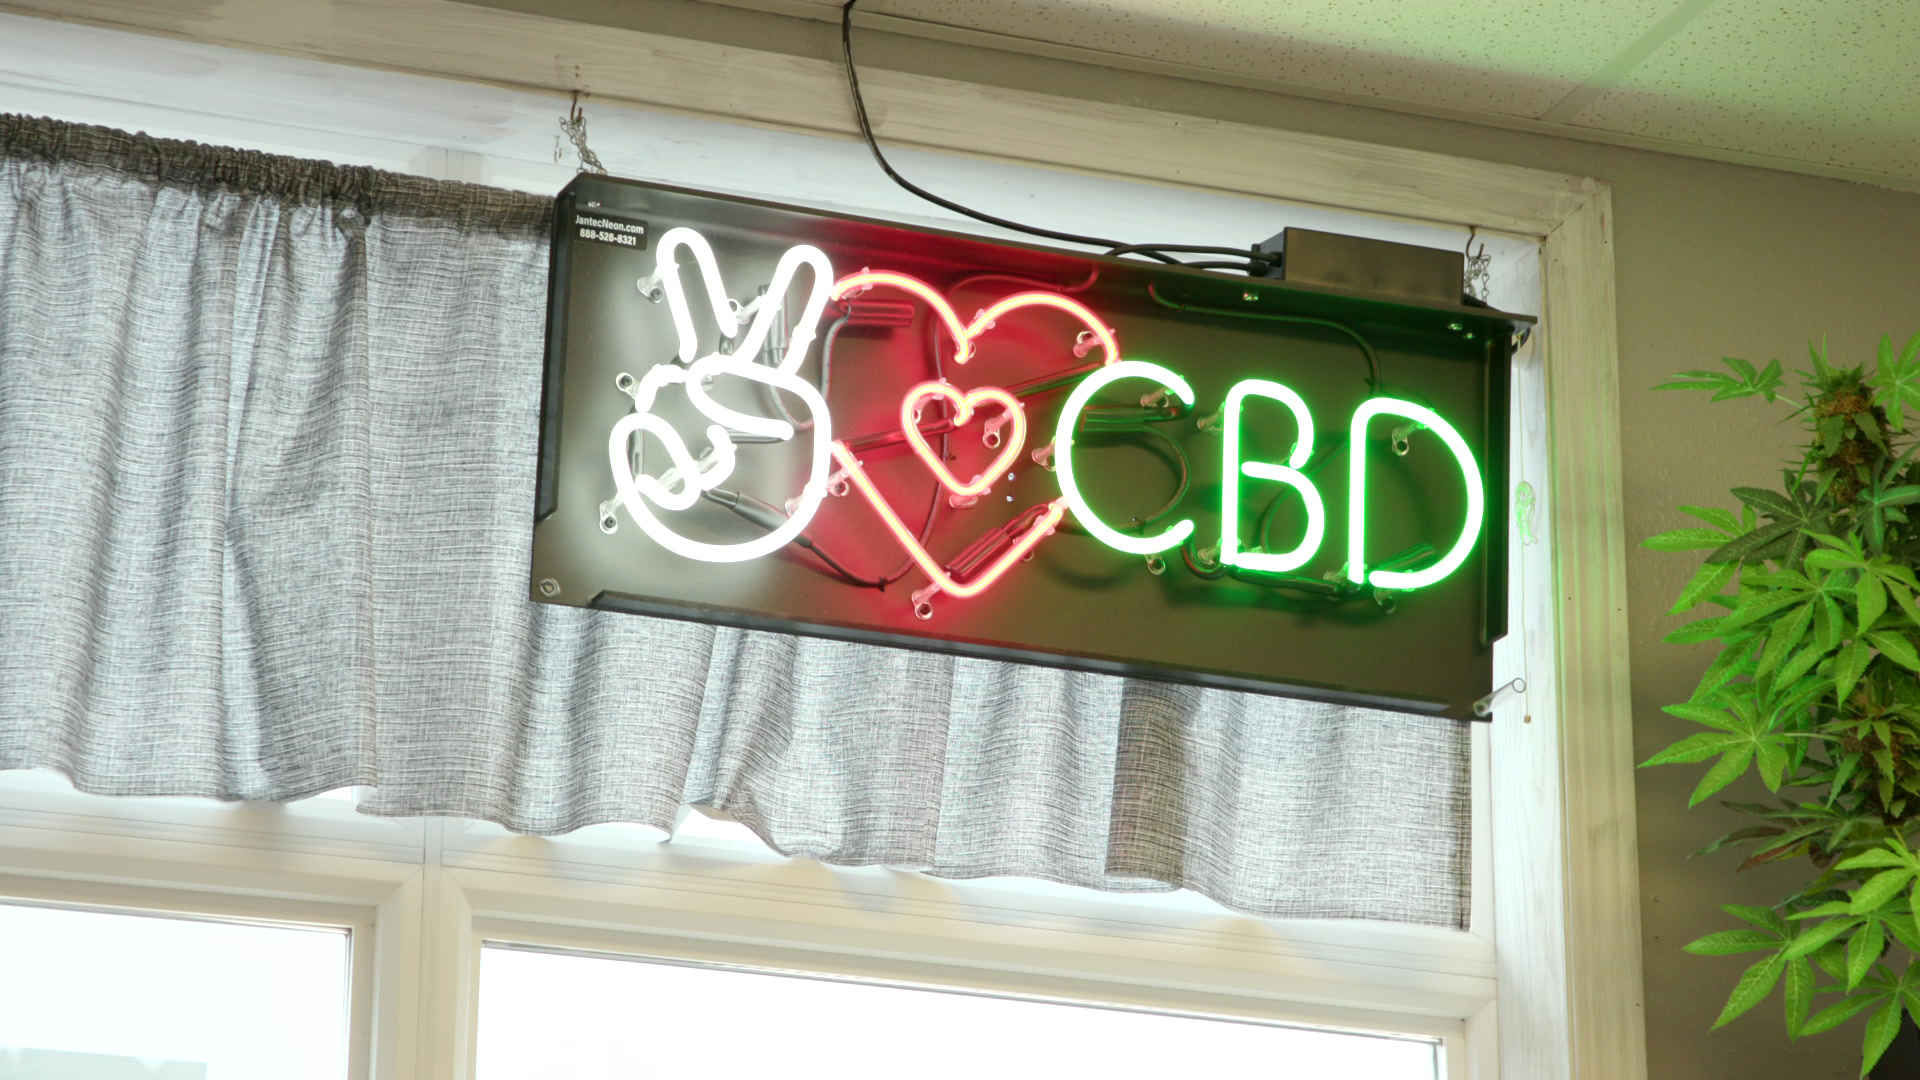 A neon sign showing the "V" finger symbol, one heart symbol nestled inside another, and the letters "CBD" is illuminated at the top right corner of a window partially covered by a curtain.